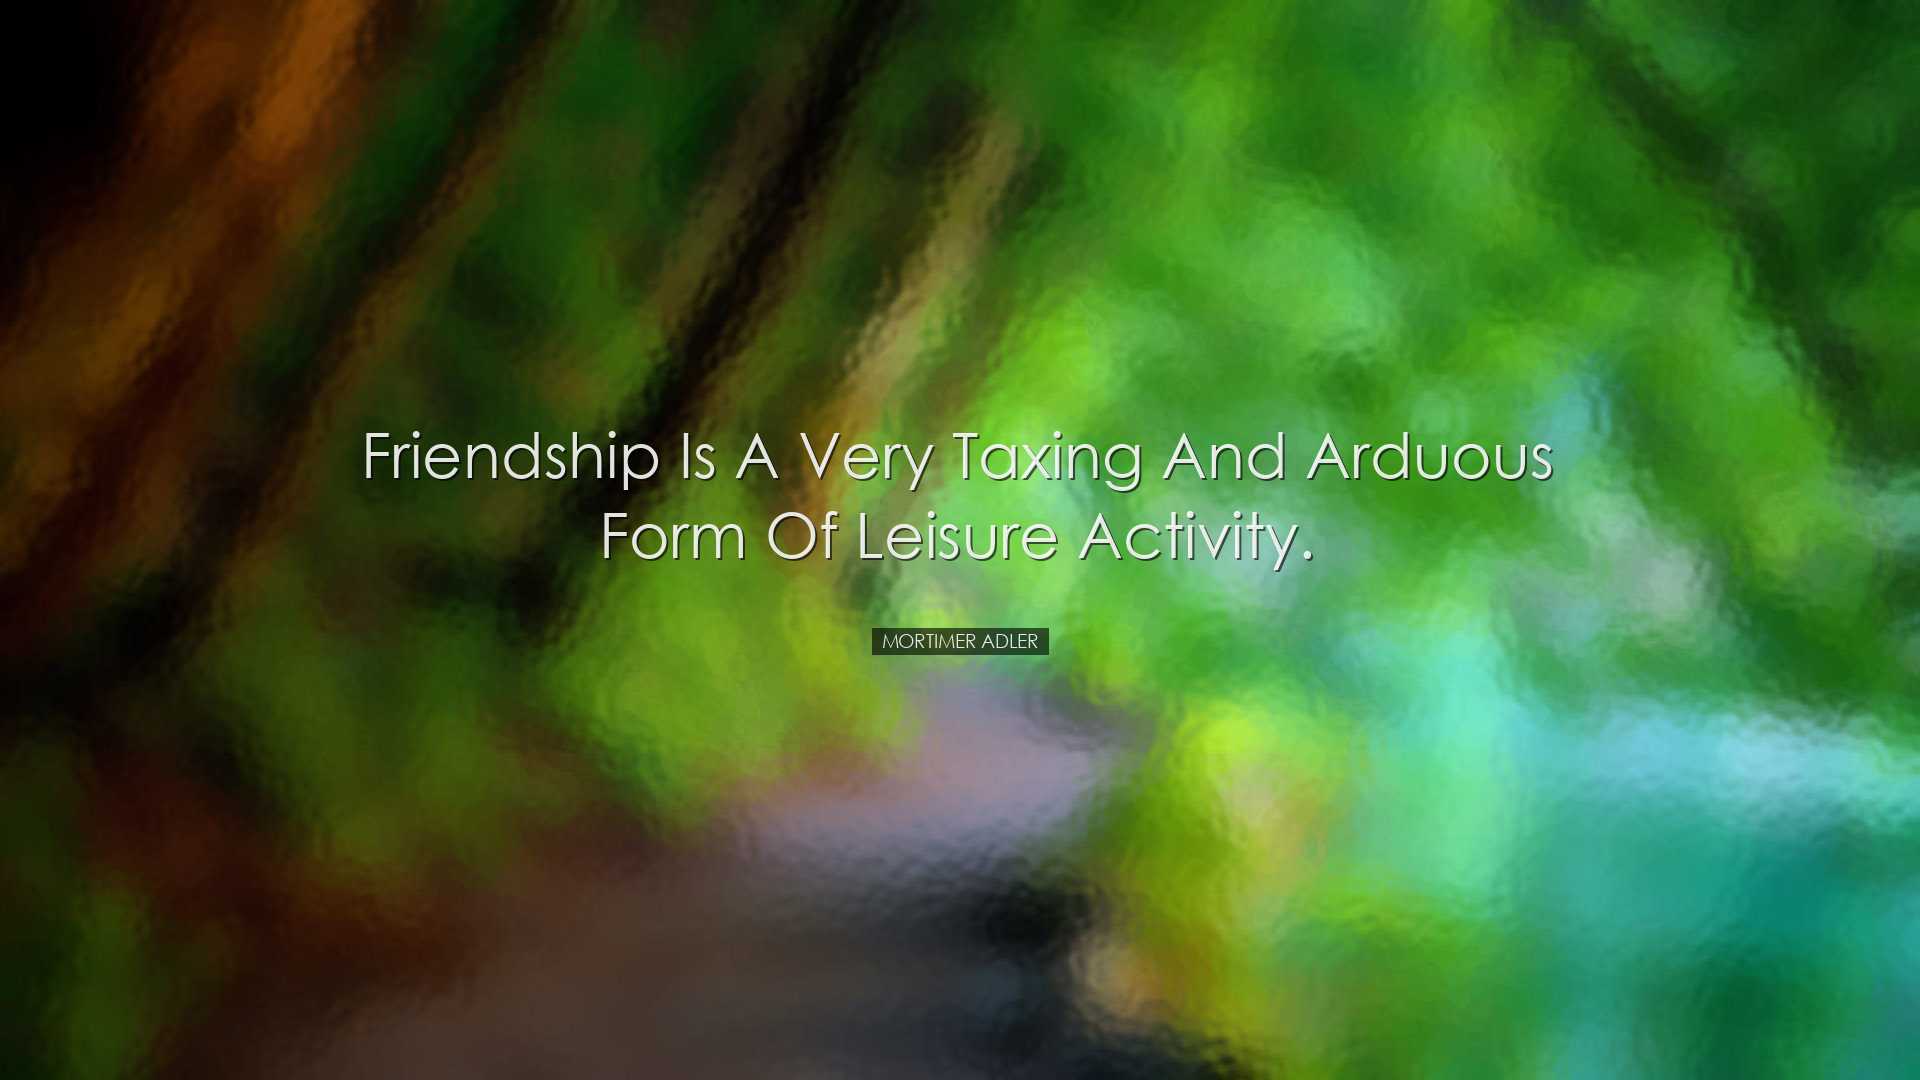 Friendship is a very taxing and arduous form of leisure activity.